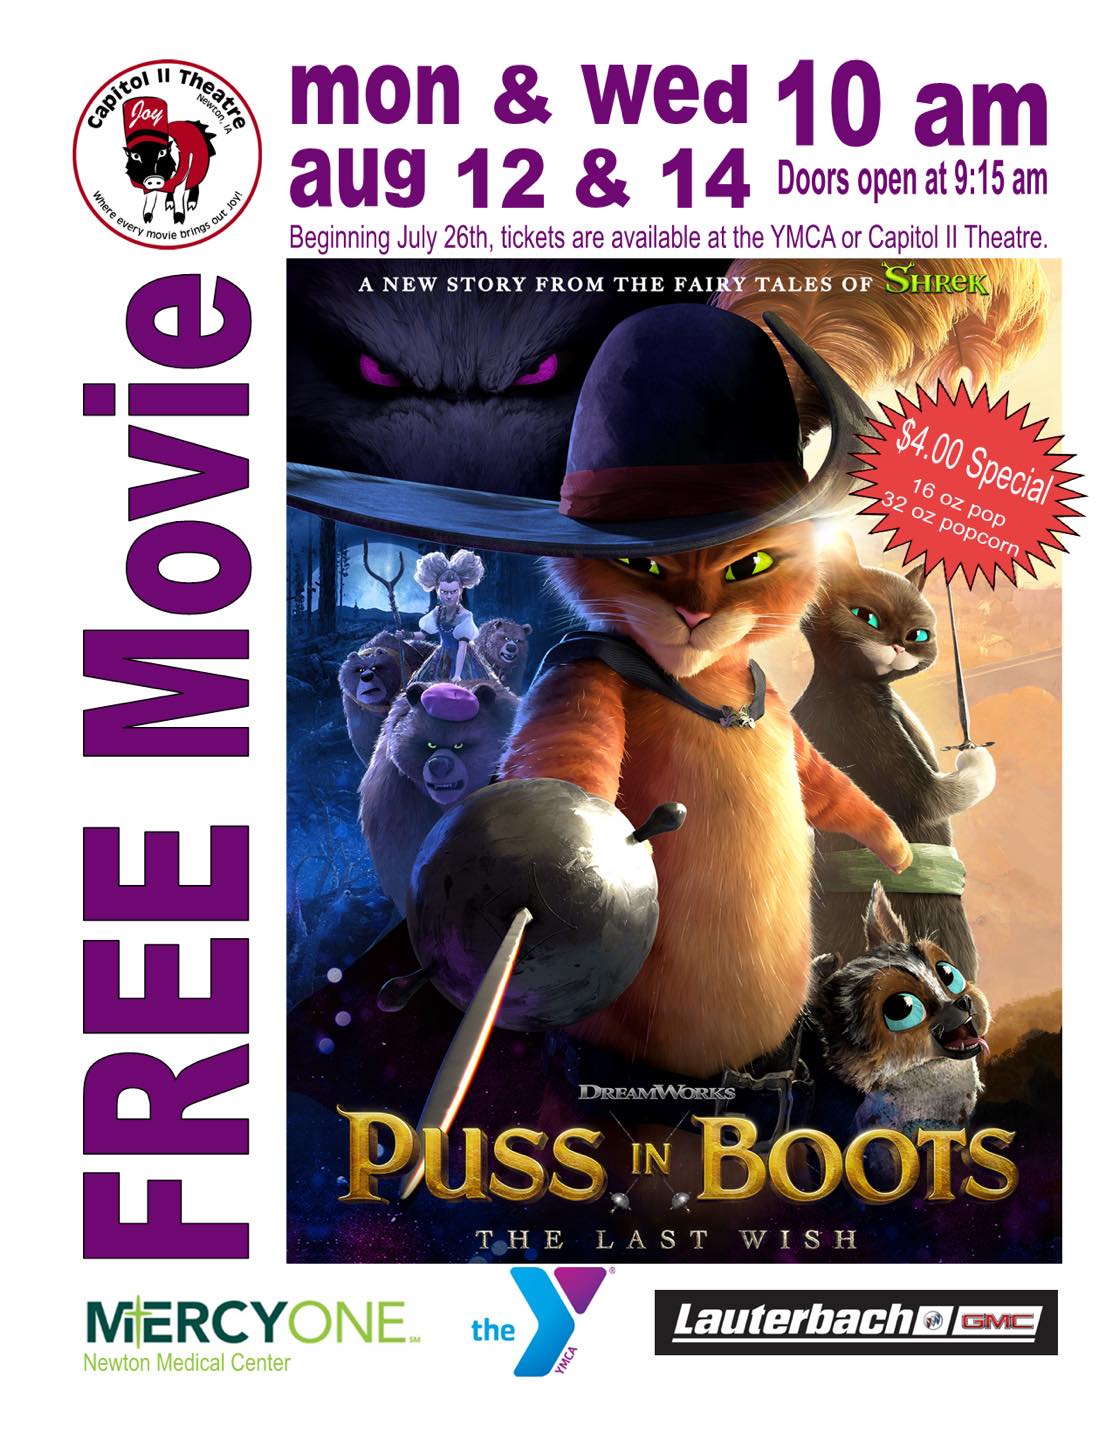 Free Movie-Puss in Boots: The Last Wish Photo